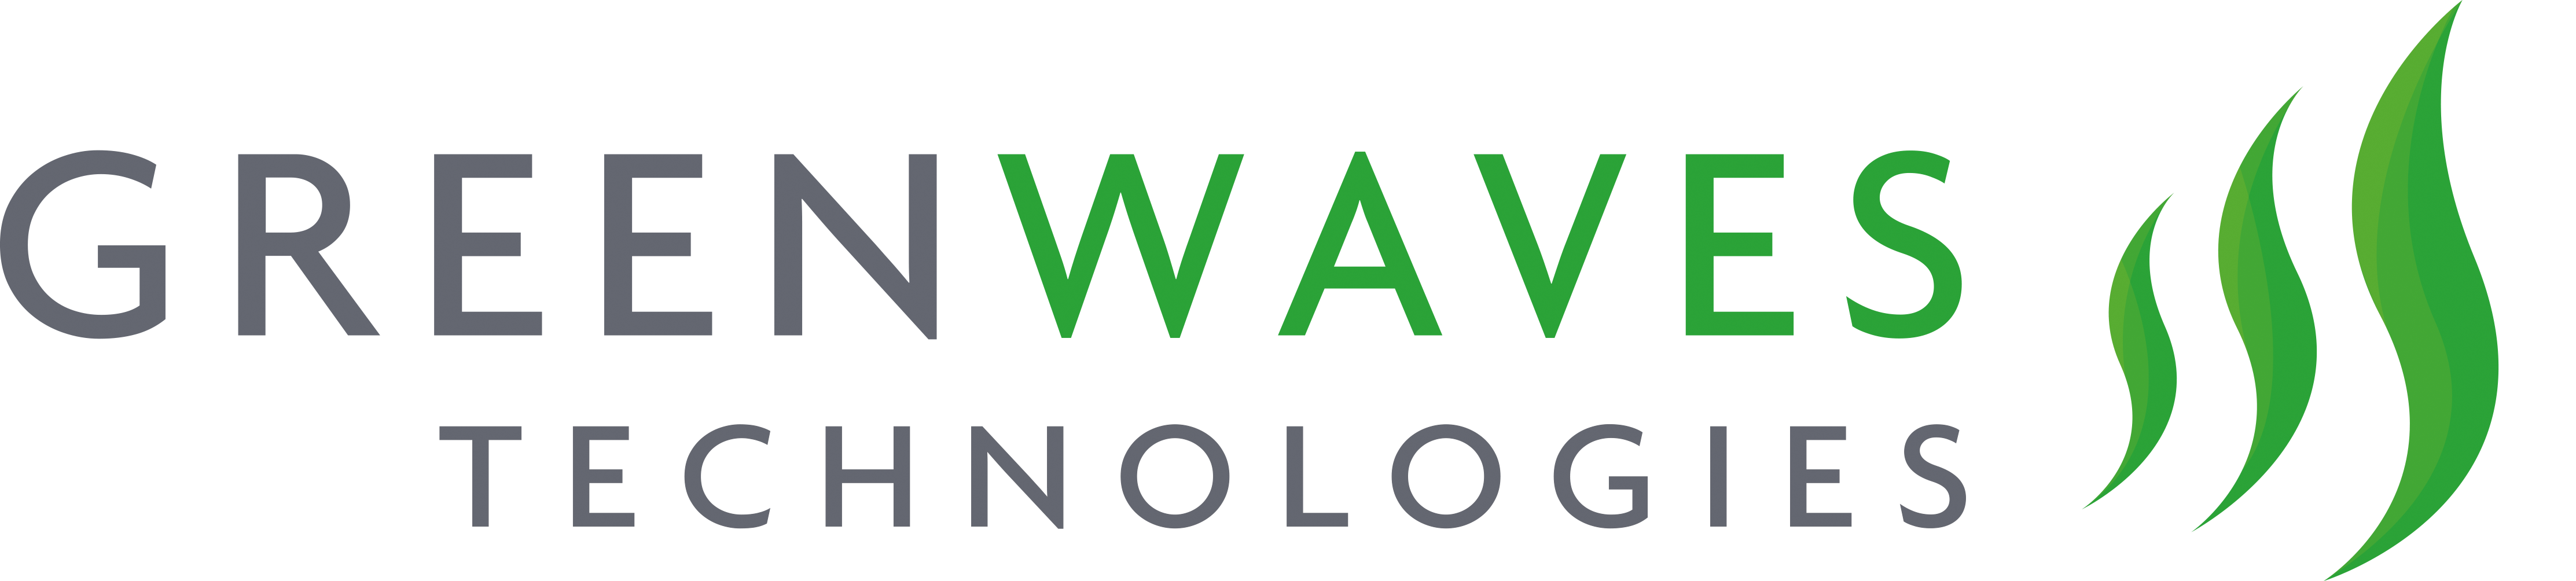 GreenWaves will Demonstrate Live the Ground-breaking AI and DSP Demos on its Ultra Low Power Chip at Embedded World 2022 | GreenWaves Technologies